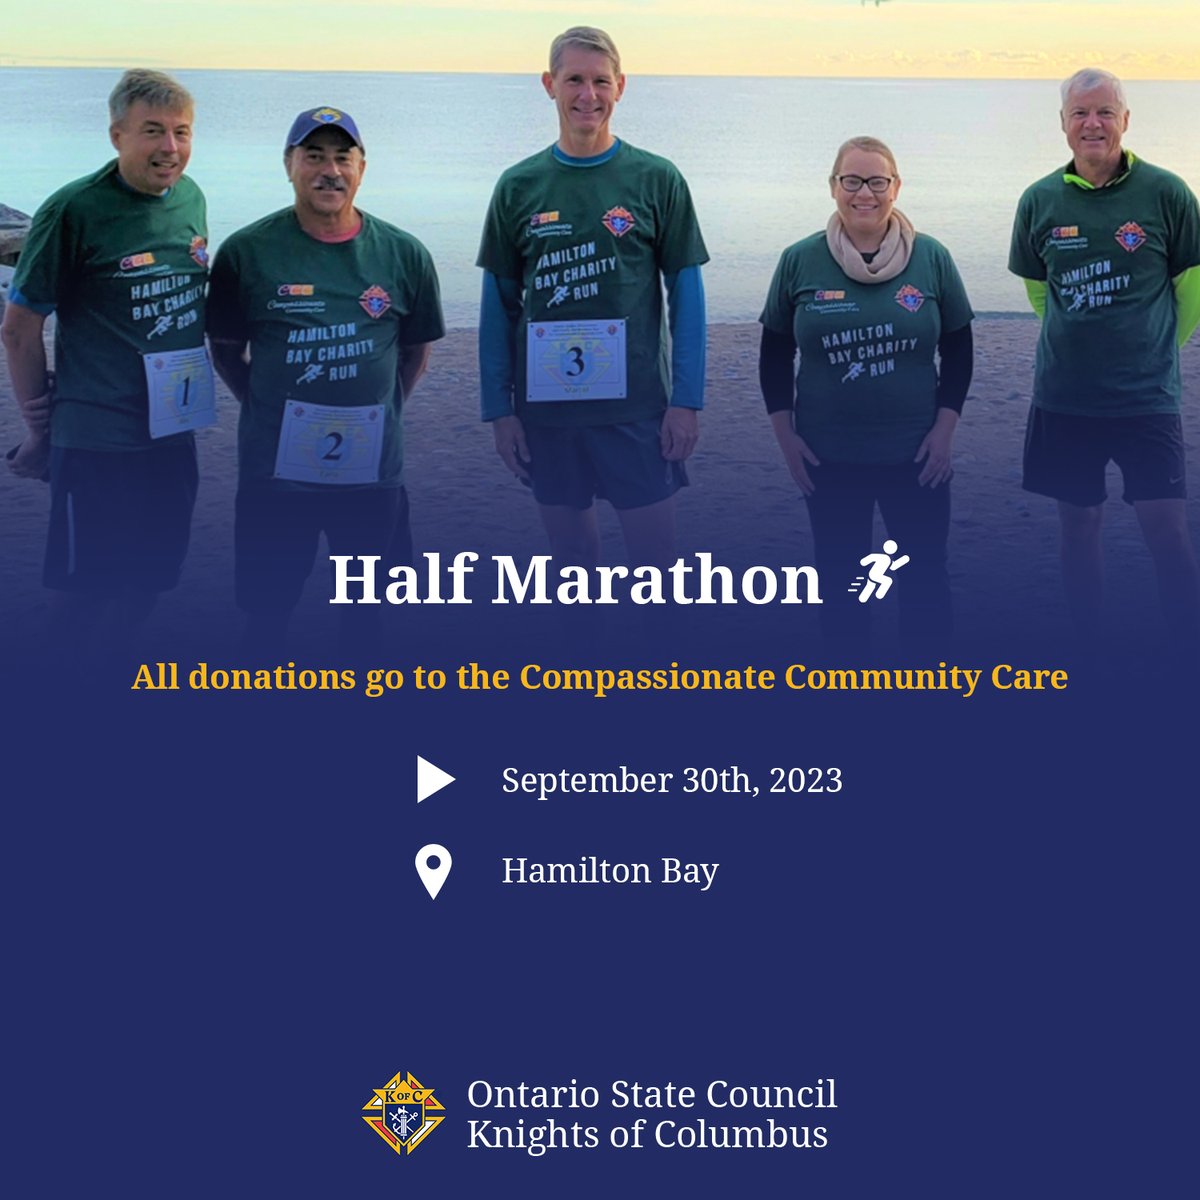 Save the date for September 30th!
Support the #KofC Charity Run!🏃‍♂️🏃‍♀️🏃
All donations go to #CompassionateCommunityCare📷
To donate, visit ontariokofc.ca/.../half-marat… 
For information, visit ontariokofc.ca/charity-half-m…

#OntarioKofC #KofCOntario
#HalfMarathonCharityRun